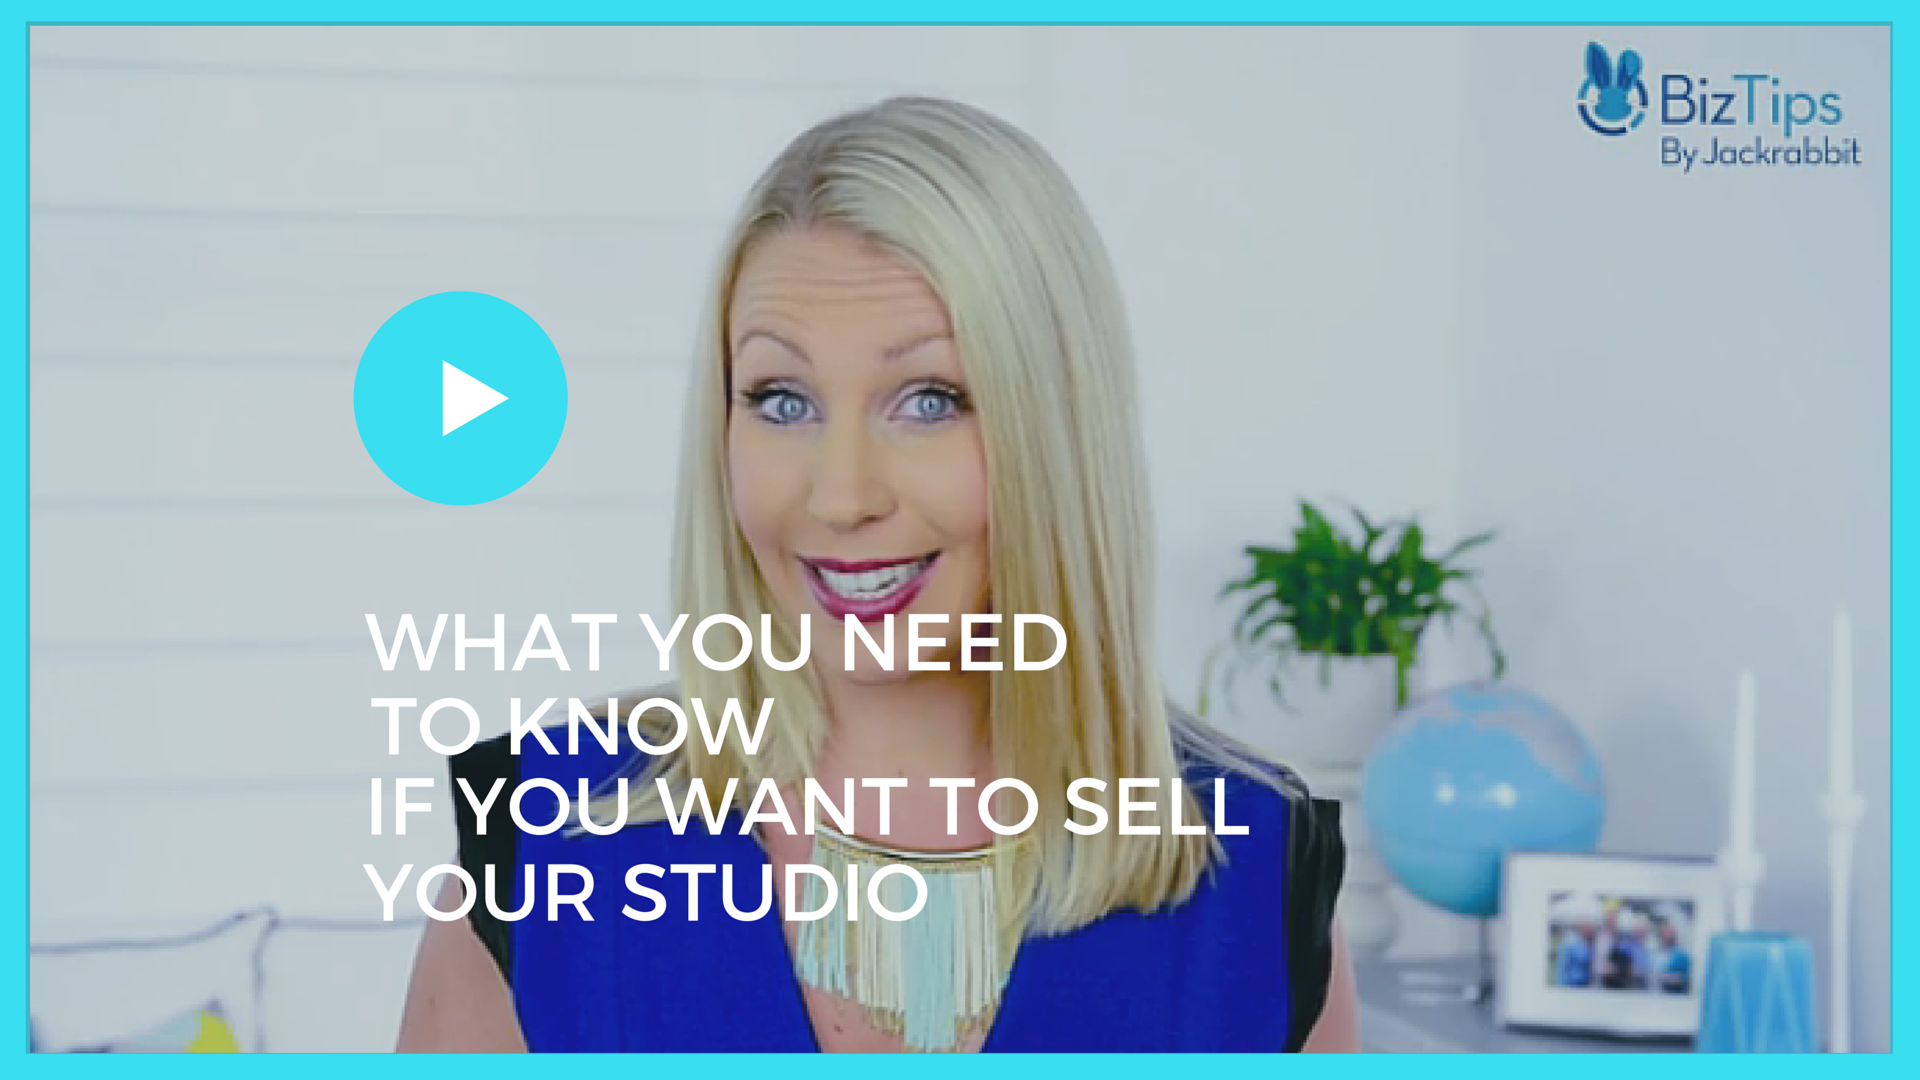 What you need to know if you want to sell your studio